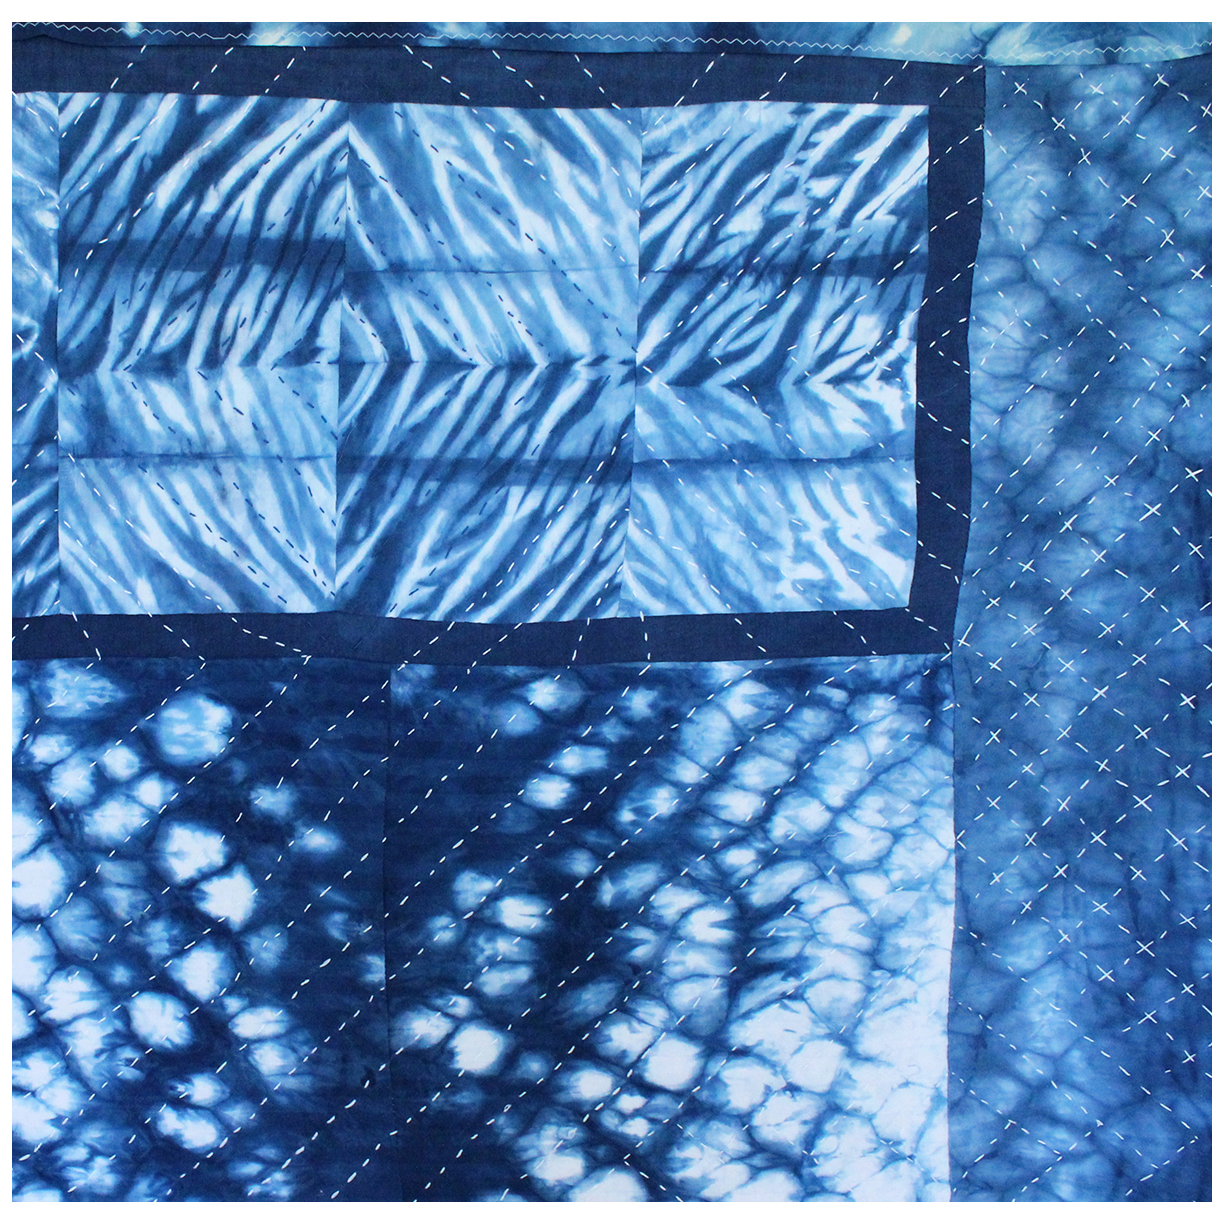 A detail view of a handmade indigo dyed patchwork quilt, showing off delicate hand stitching patterns.